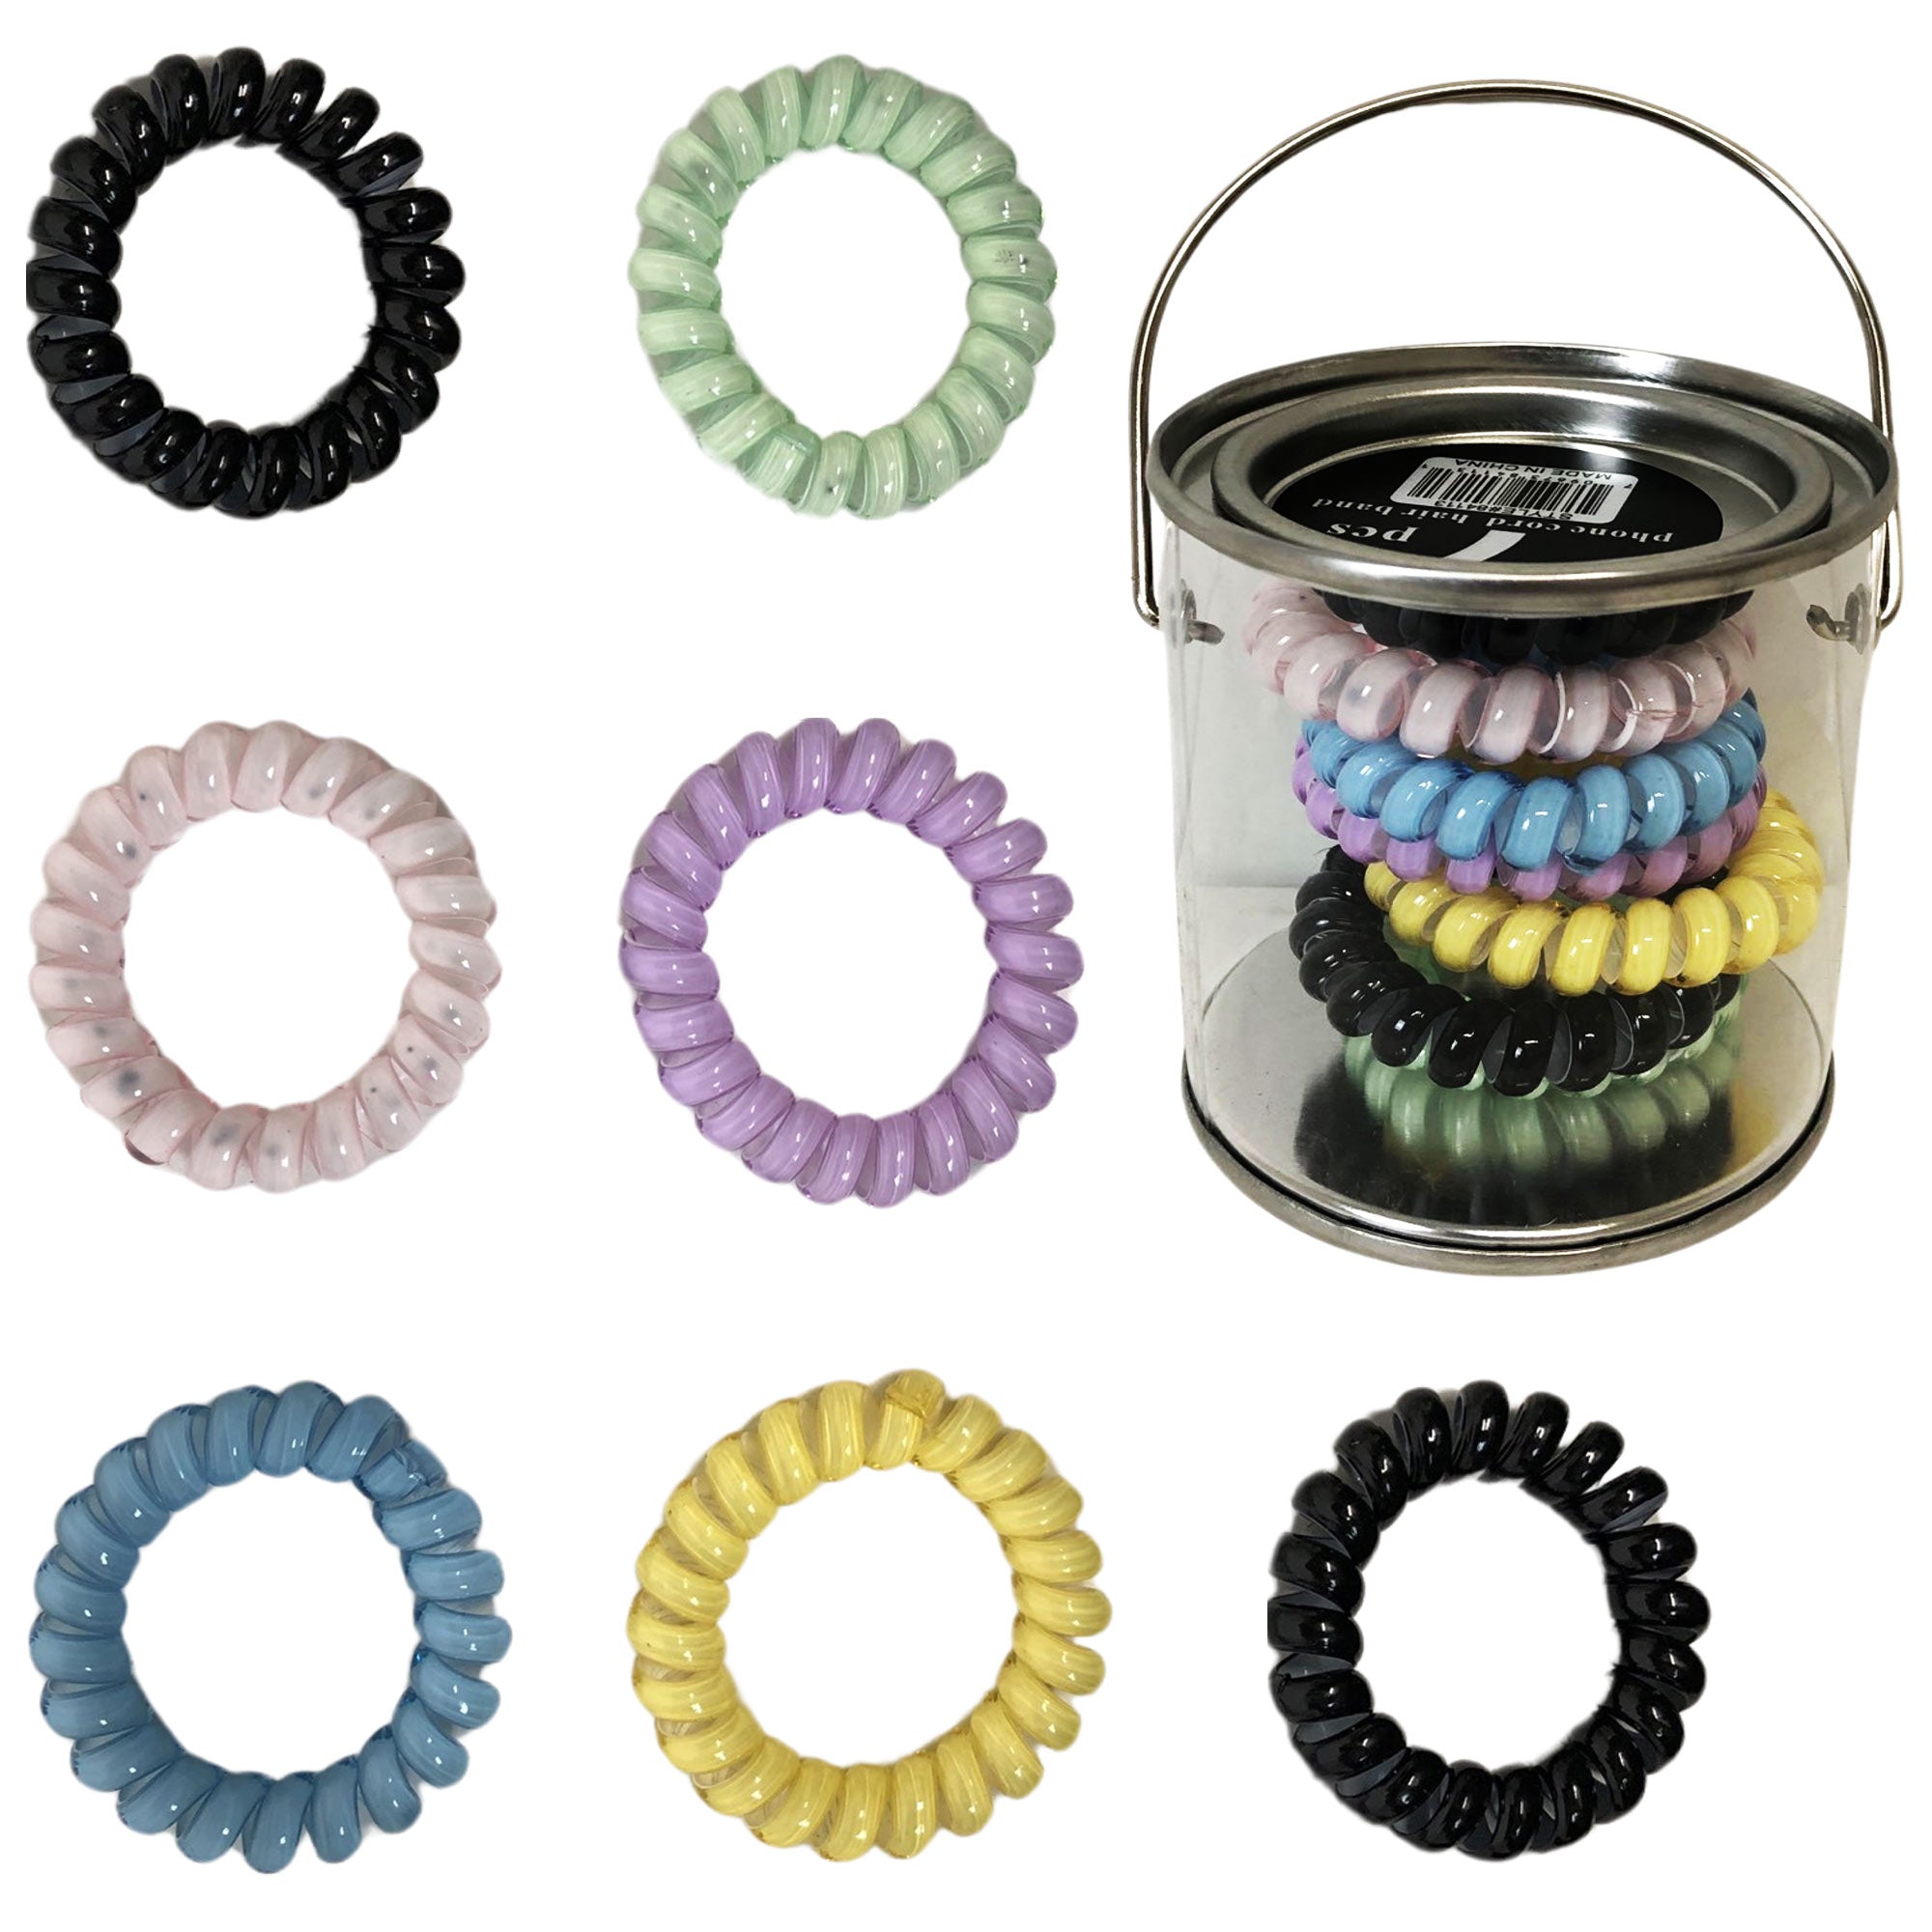 CLEARANCE CORDED HAIR TIES ASSORTED (CASE OF 36 - $2.00 / PIECE)  Wholesale Hair Ties SKU: CORDED-HAIR-TIES-ASSORTED-36